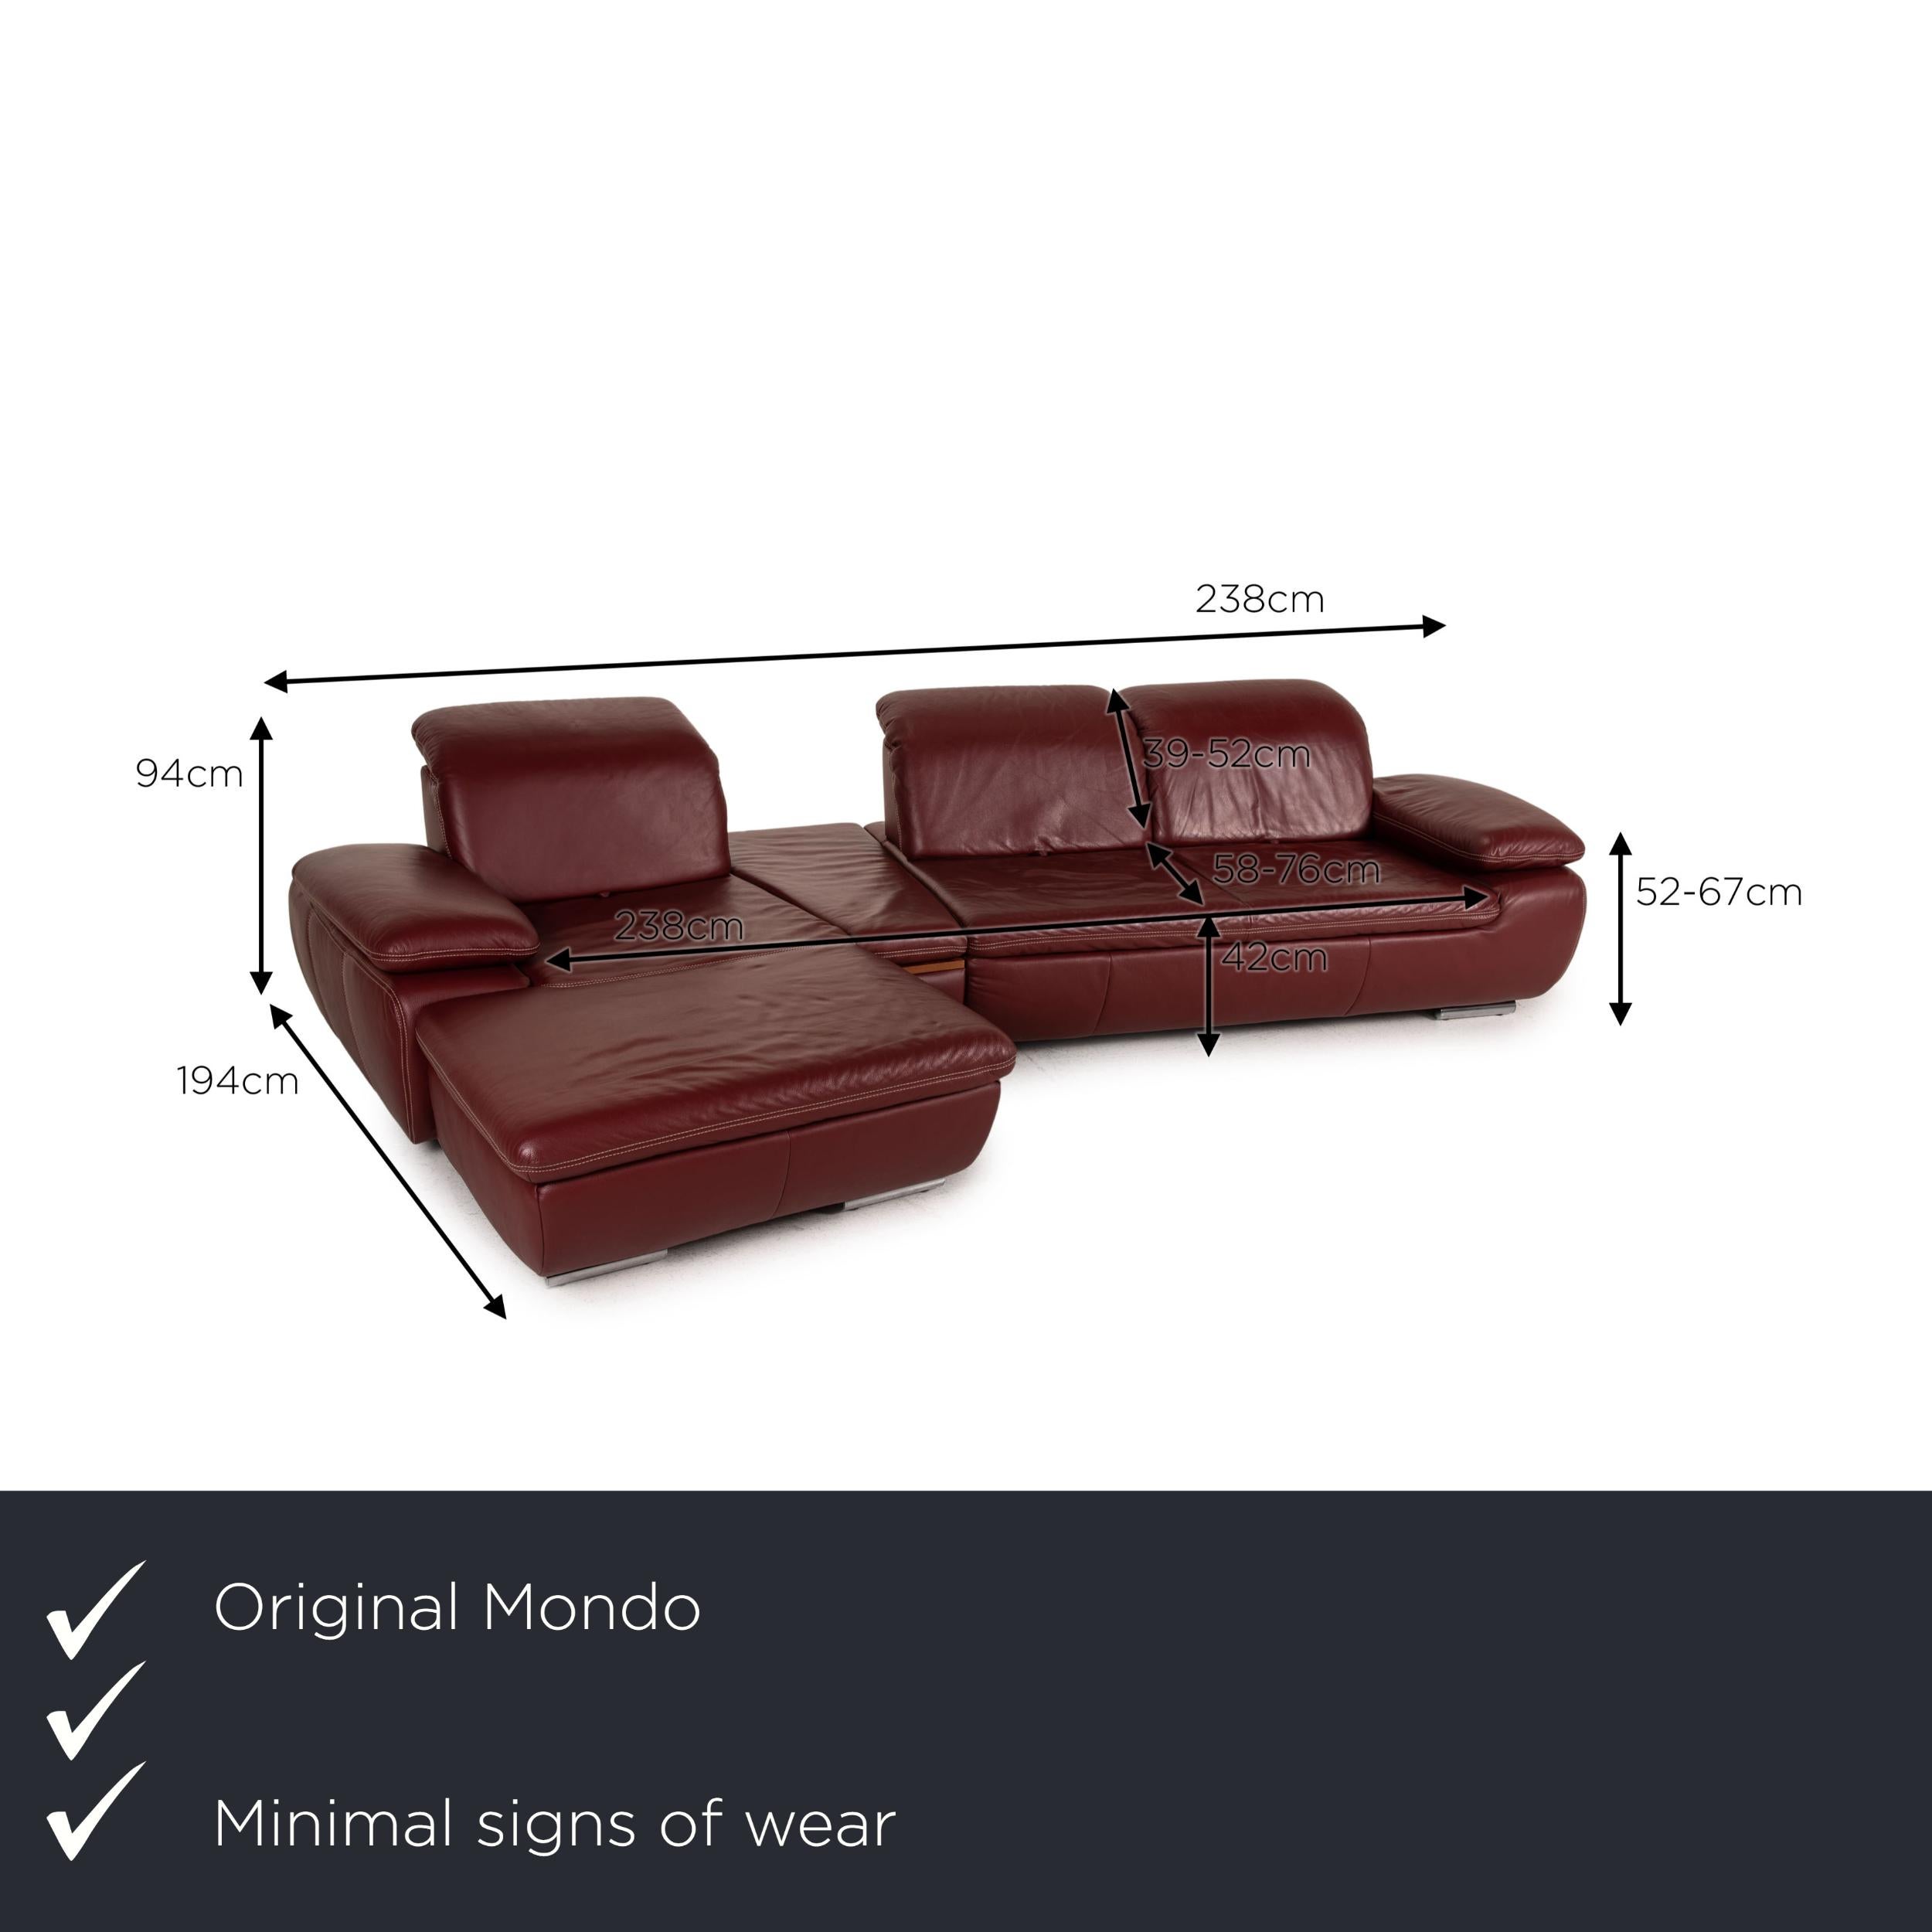 We present to you a Mondo Clair leather soda red corner sofa couch function.
  
 

 Product measurements in centimeters:
 

 depth: 194
 width: 328
 height: 94
 seat height: 42
 rest height: 52
 seat depth: 58
 seat width: 238
 back